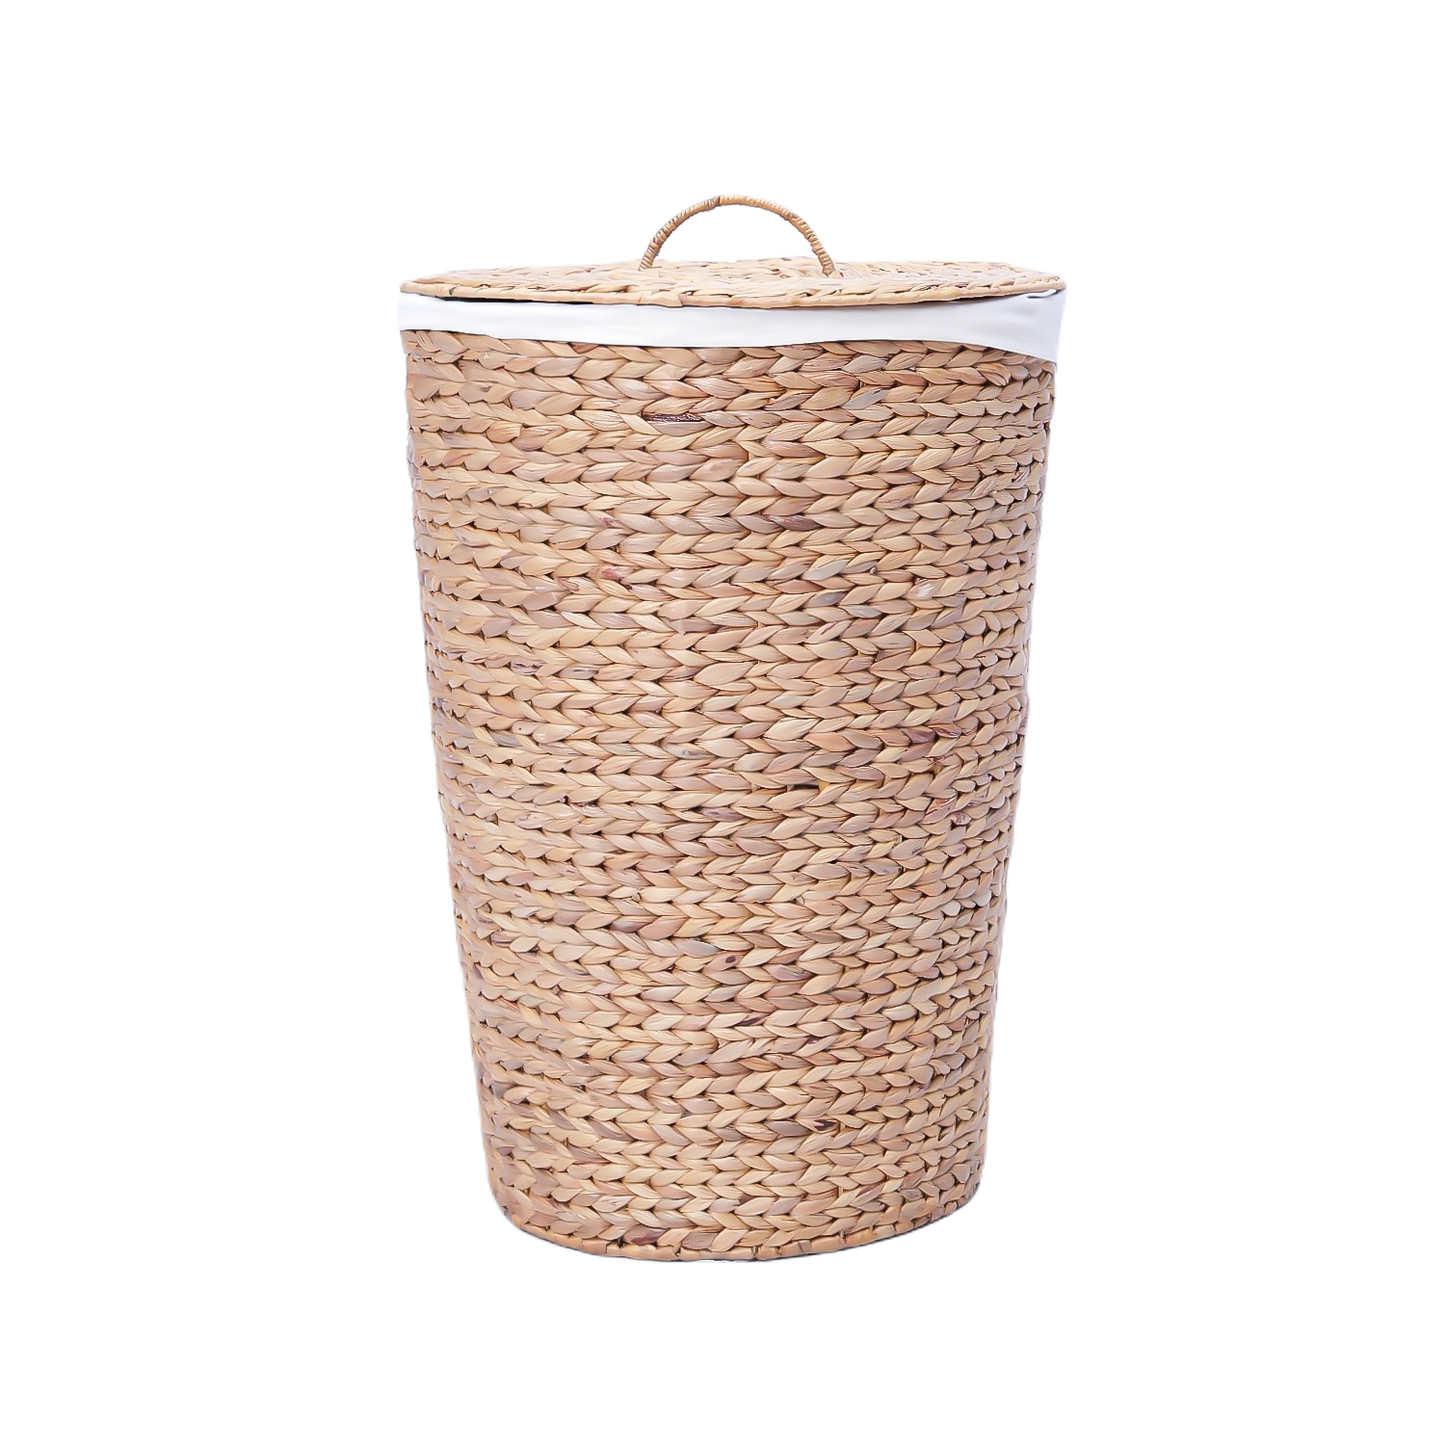 The basket has a drawer to store bed linen, sofa and furniture in the room